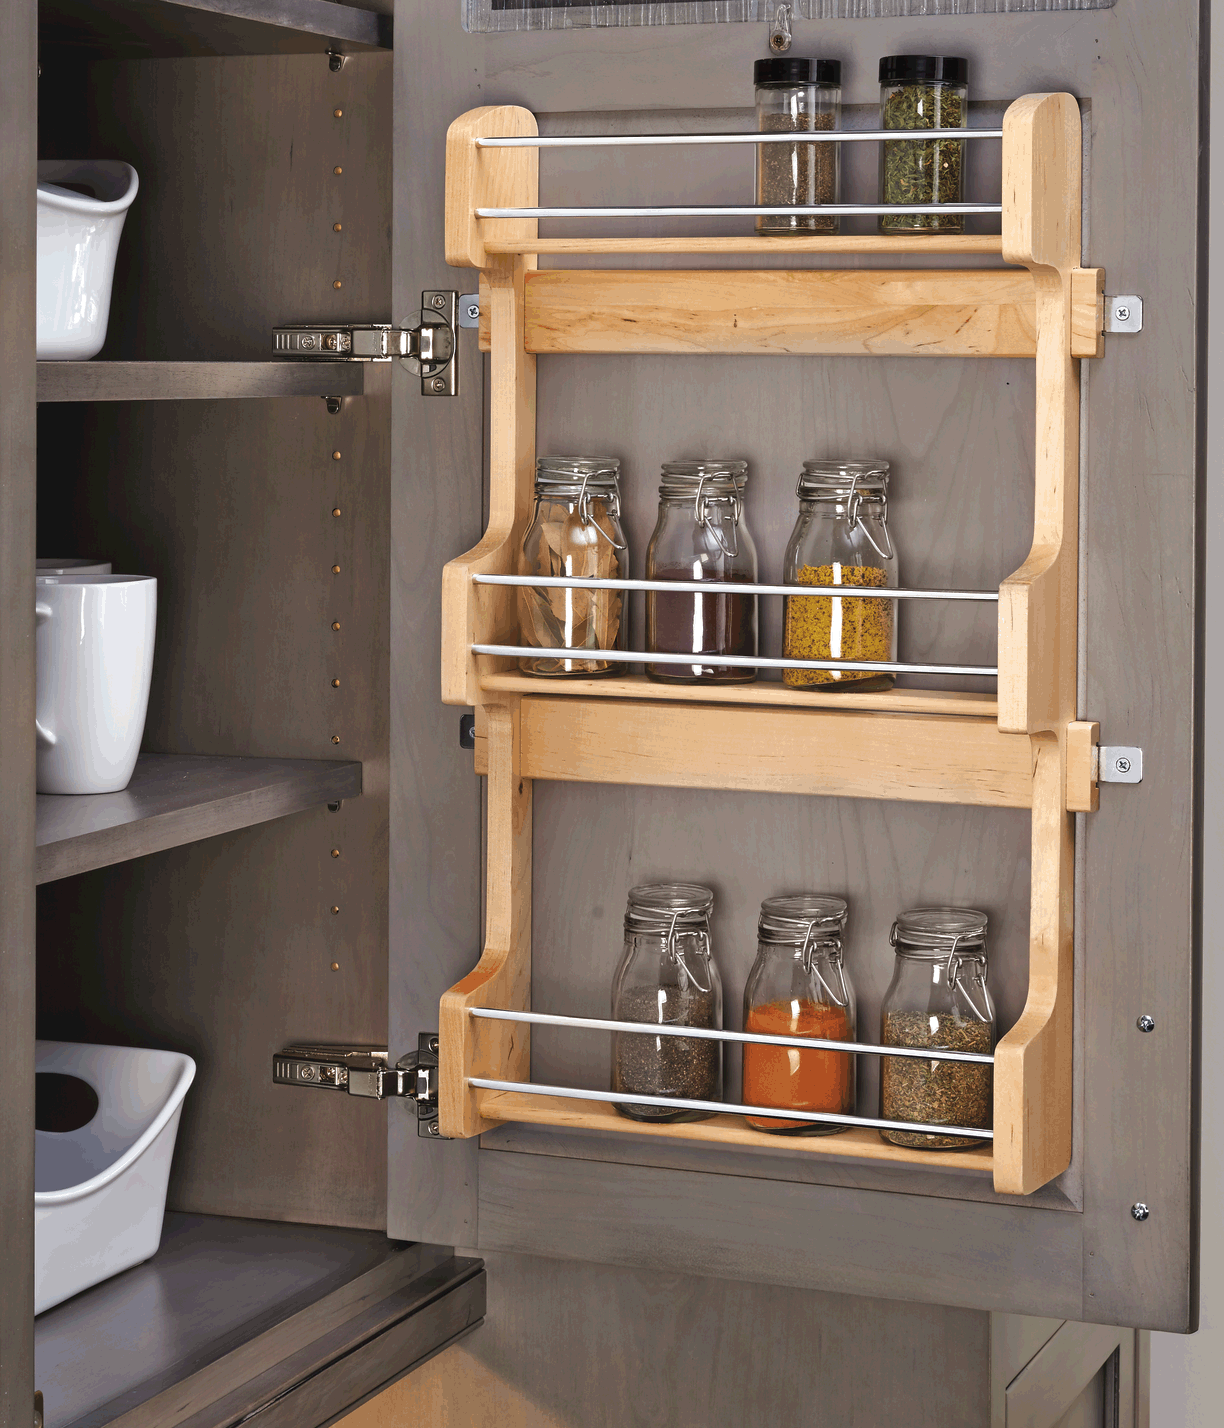 Rev-A-Shelf Vanity Outlet Grooming Organizer Pullout